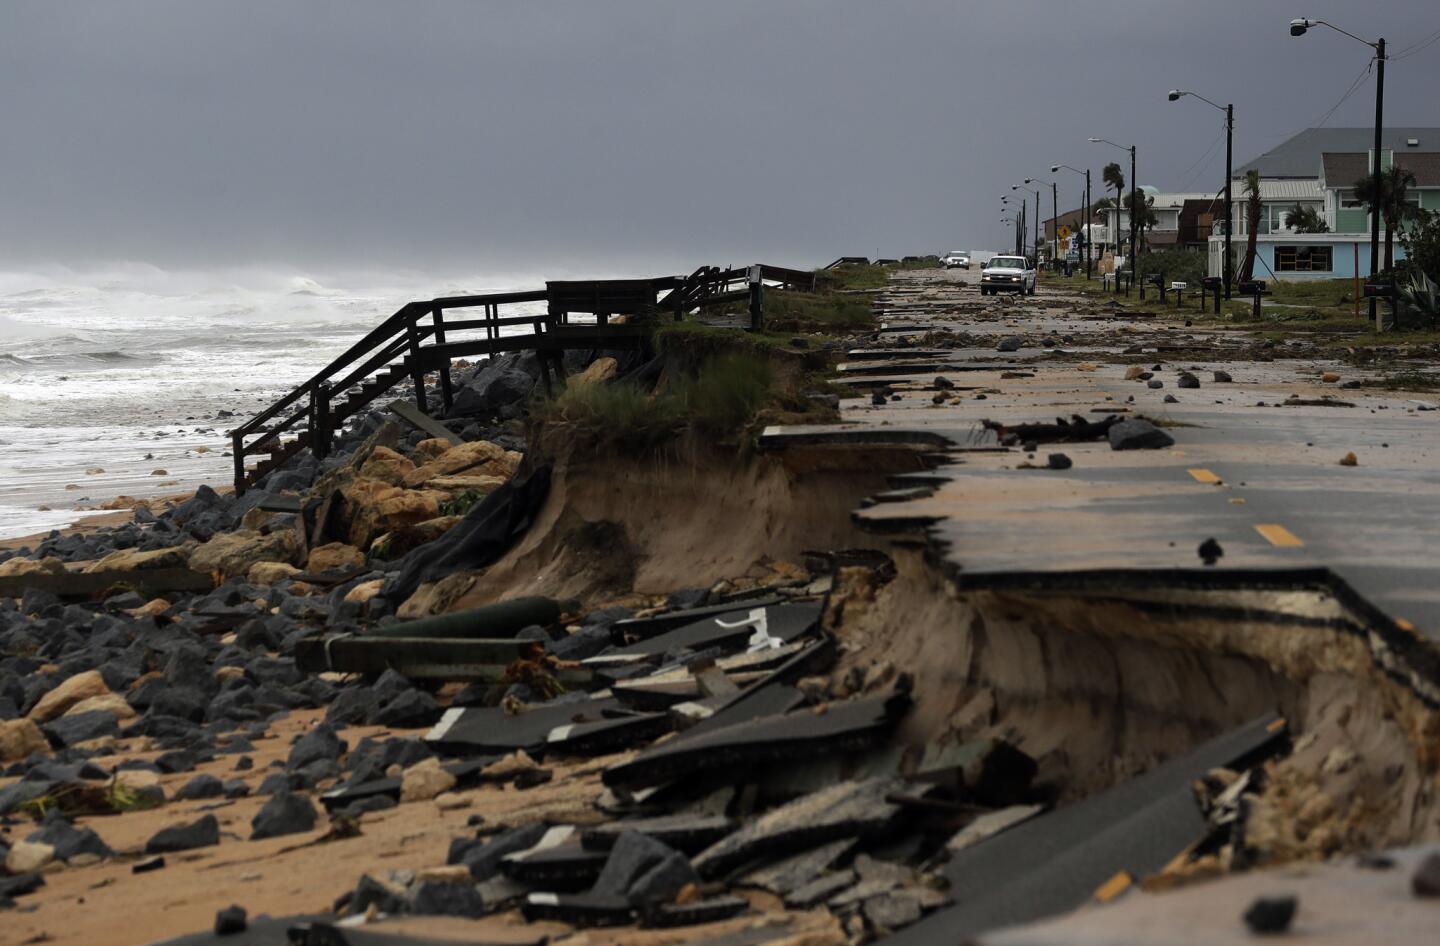 An official vehicle navigates debris as it passes along Highway A1A after it was partial washed away by Hurricane Matthew, Friday, Oct. 7, 2016, in Flagler Beach, Fla. Hurricane Matthew spared Florida's most heavily populated stretch from a catastrophic blow Friday but threatened some of the South's most historic and picturesque cities with ruinous flooding and wind damage as it pushed its way up the coastline.